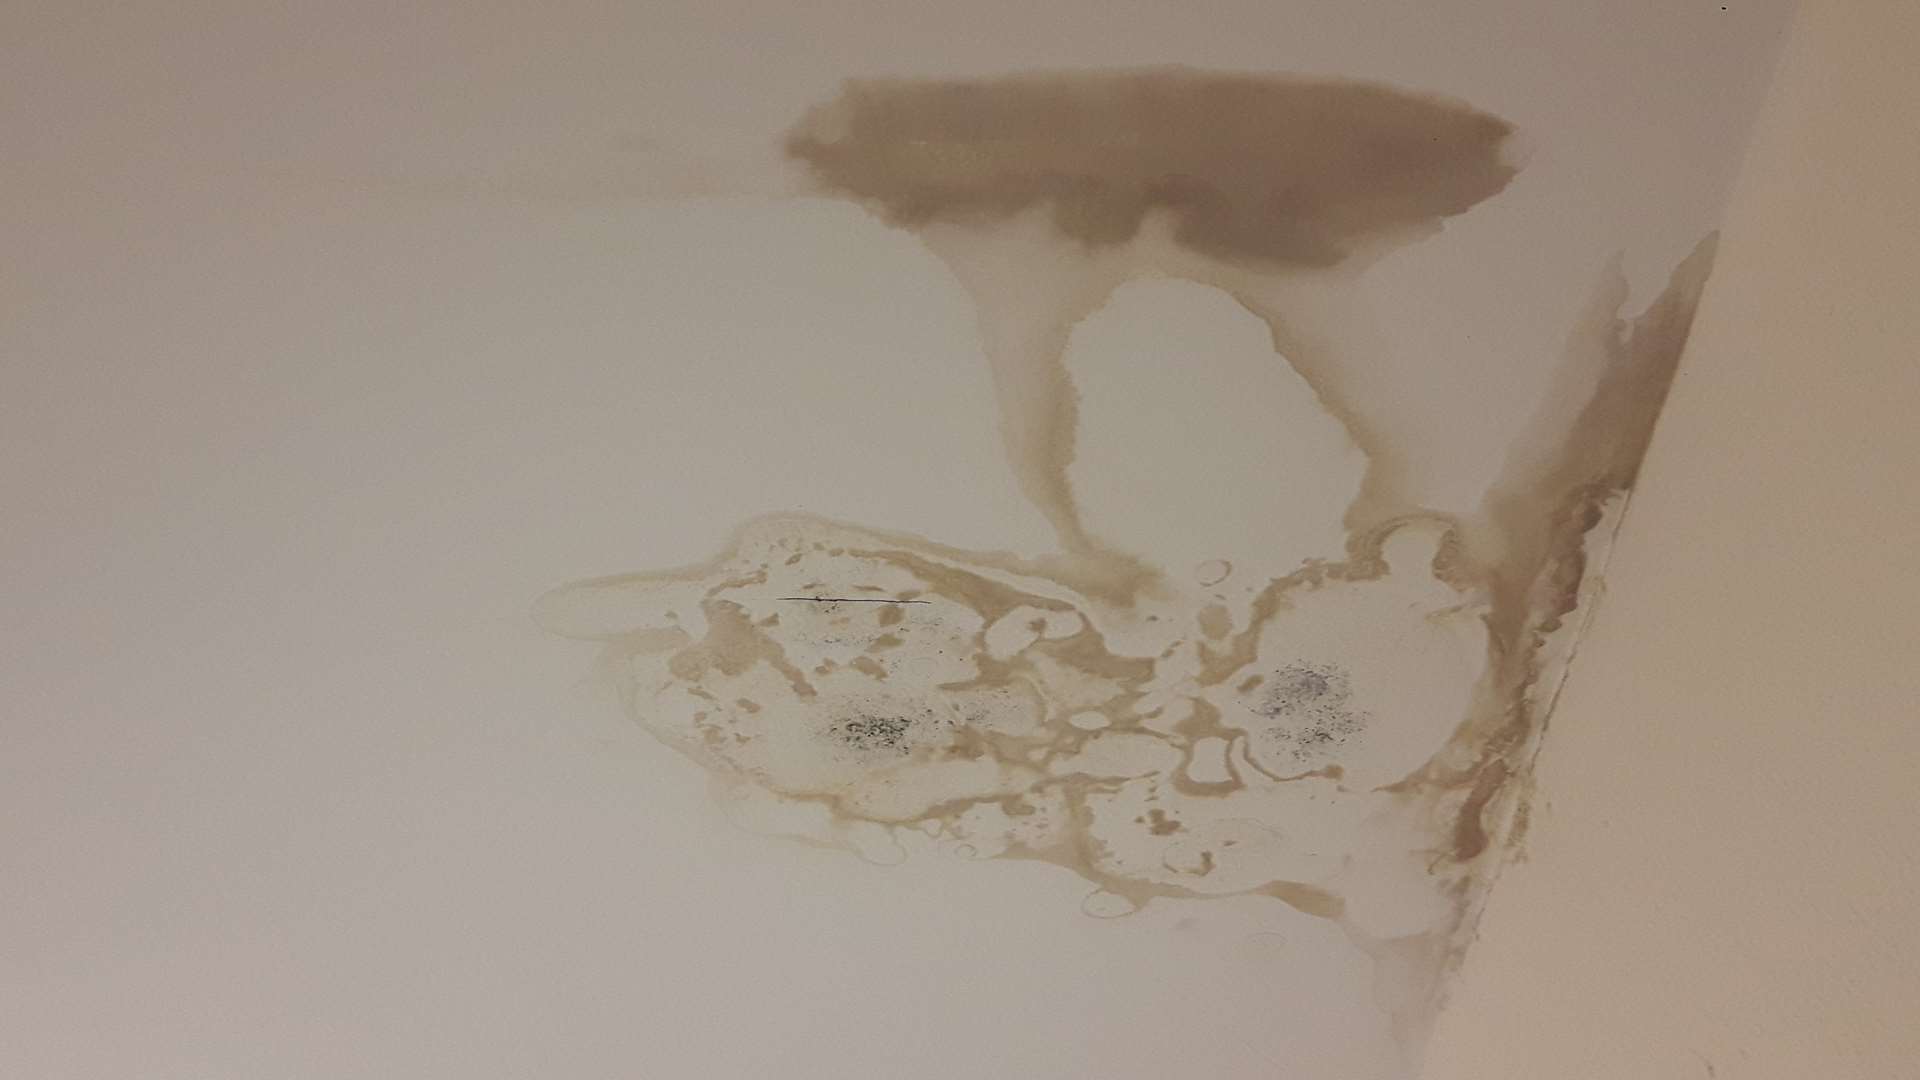 A stain on a wall